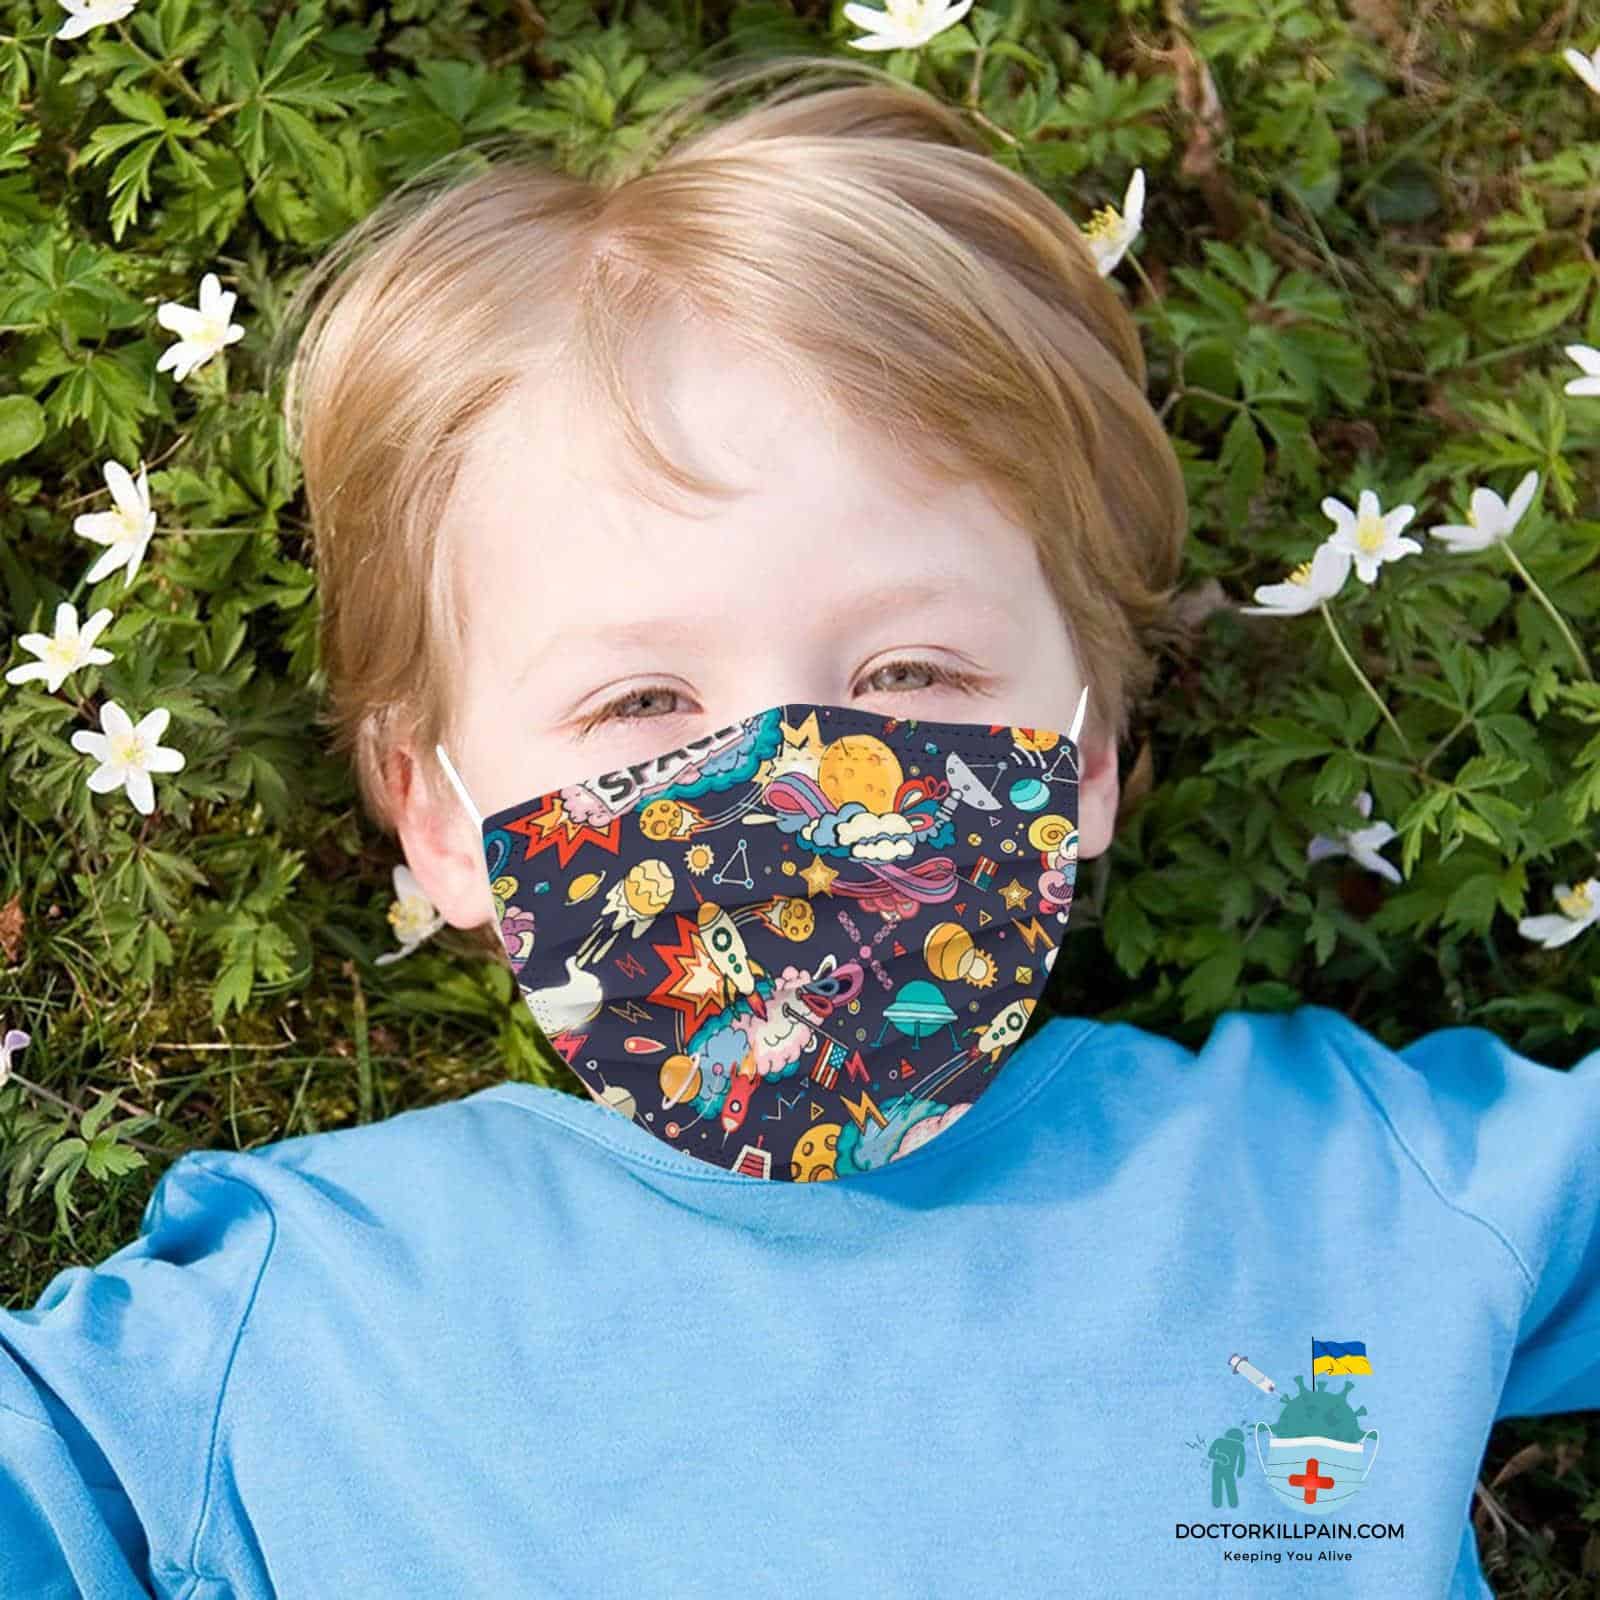 Pre School And Day Care. Child Mask Disposable Face Mask Print Masks For Protection Children Disposable Face Mask Halloween Masque Enfant Jetable